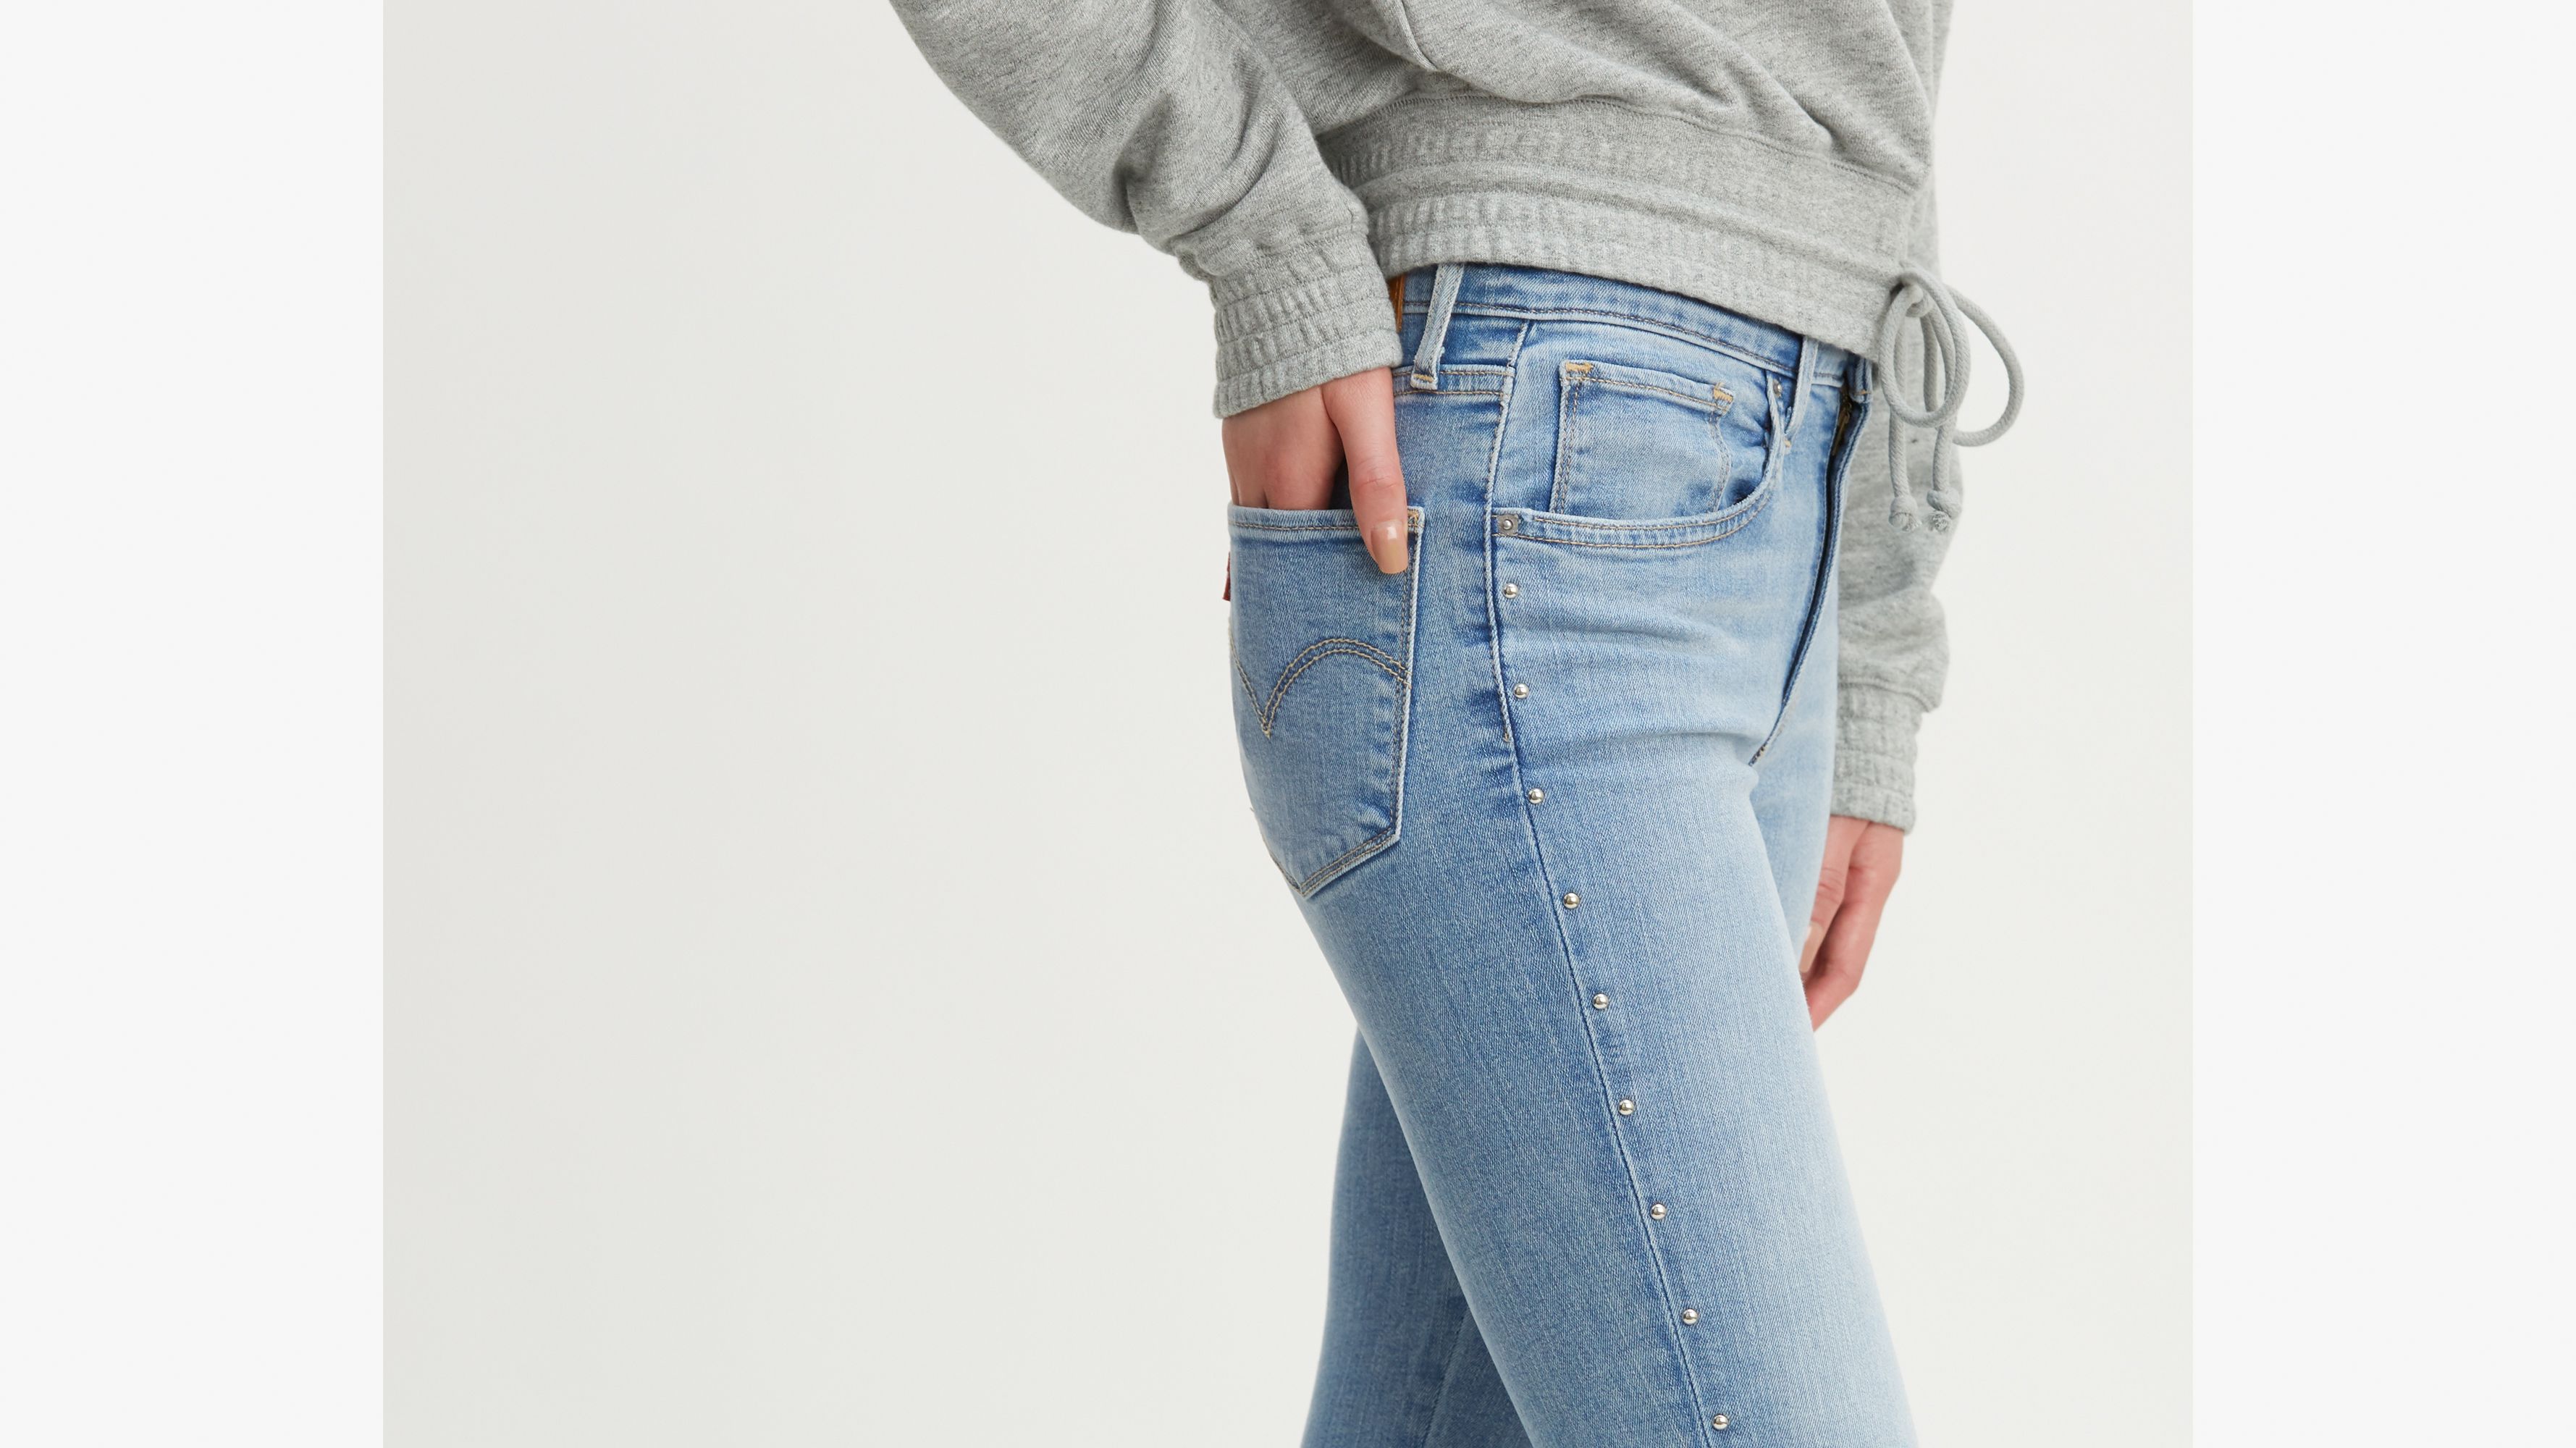 levi's high rise ankle skinny jeans